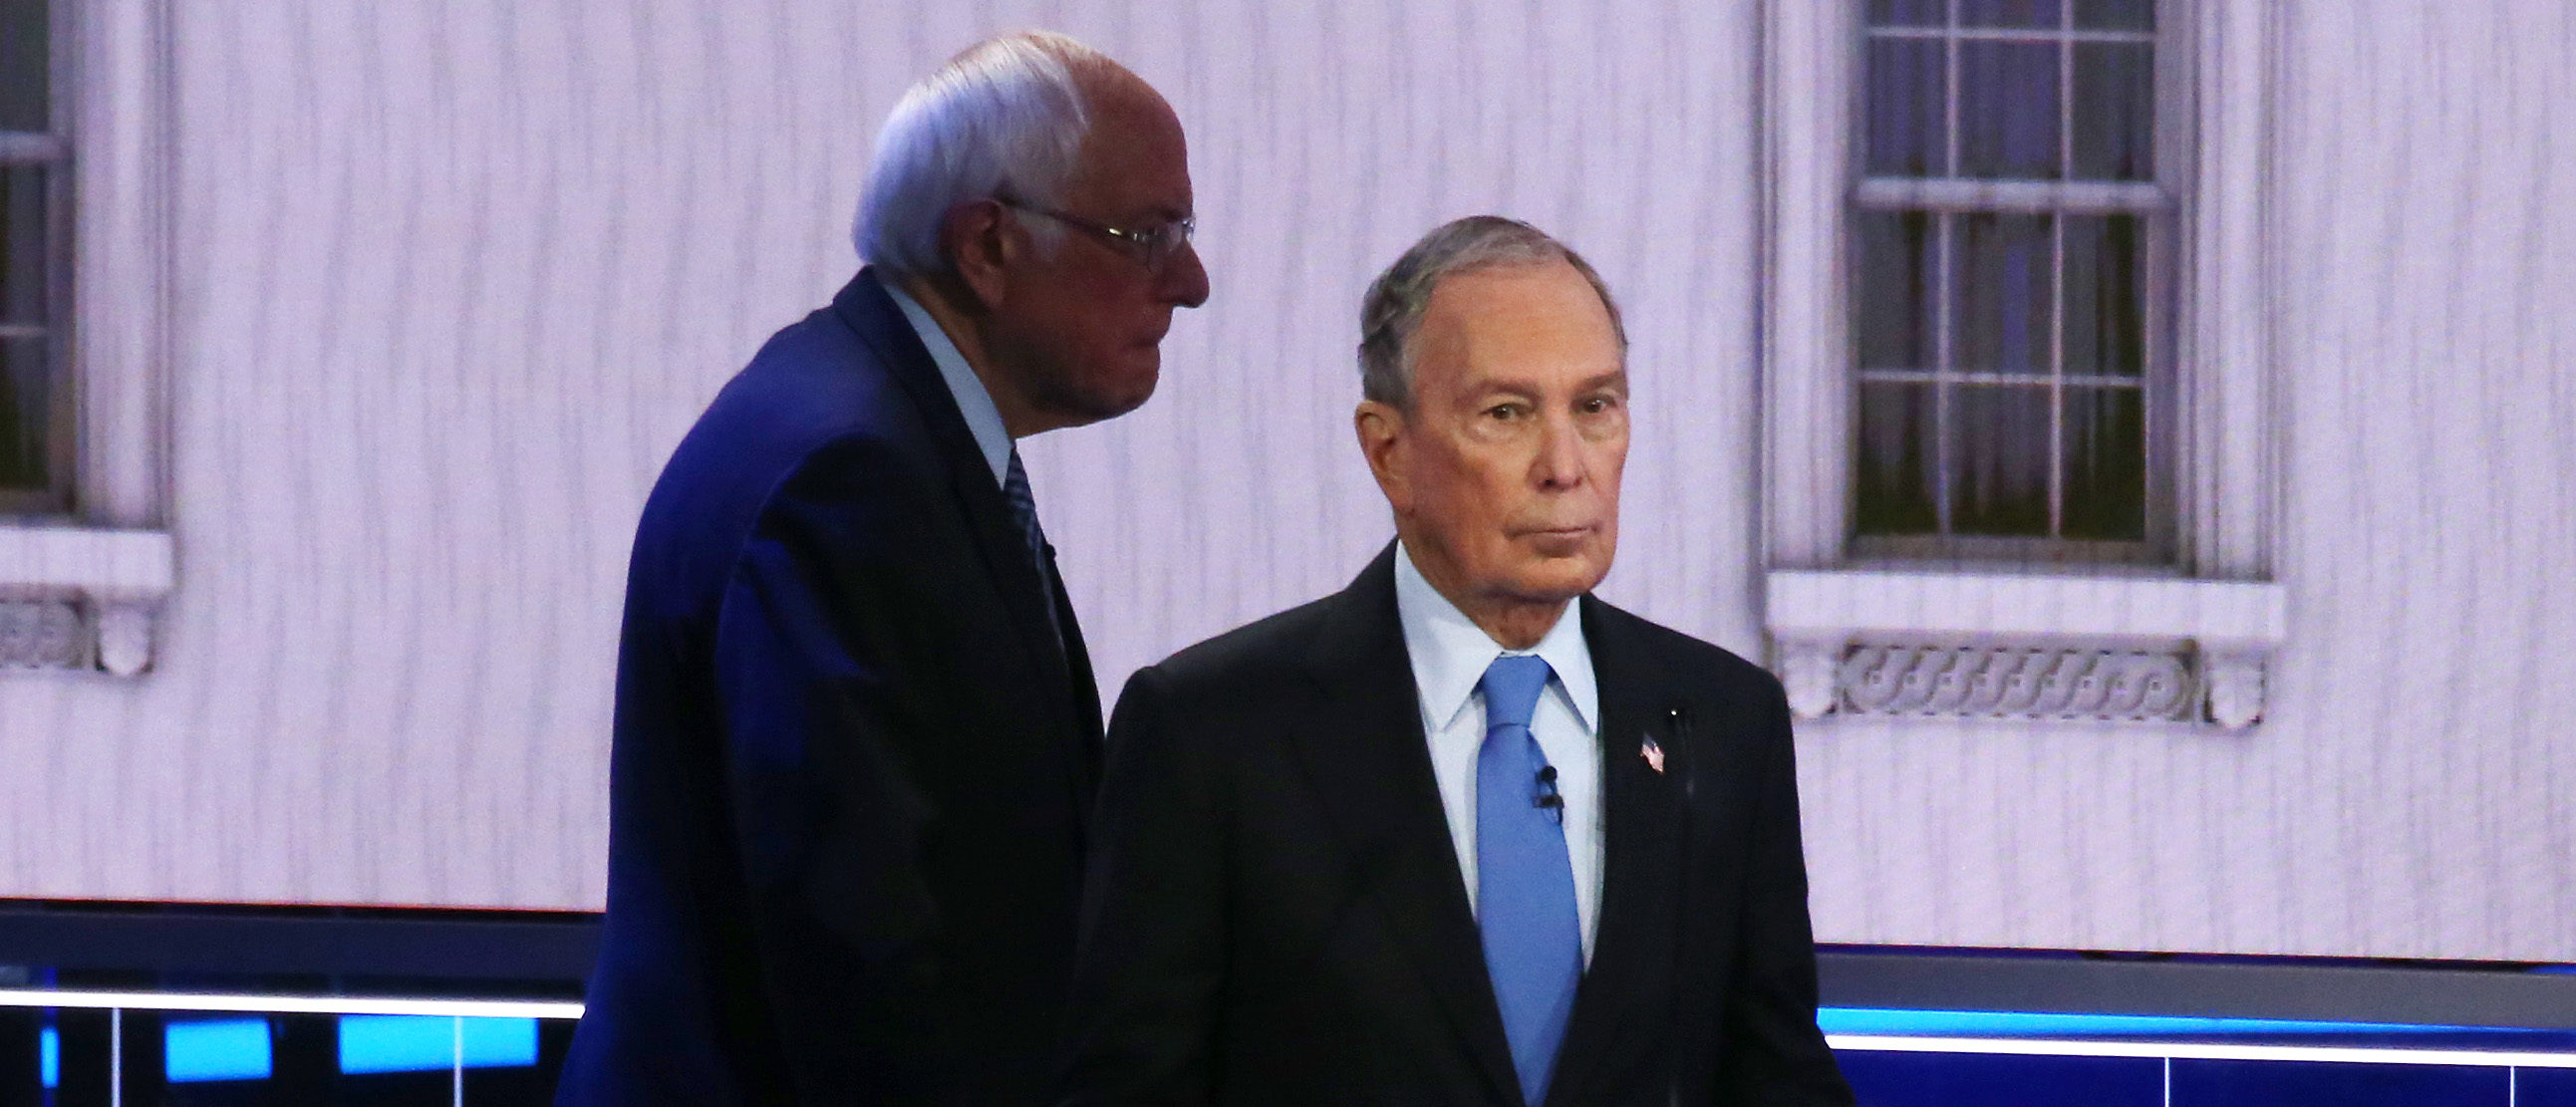 LAS VEGAS, NEVADA - FEBRUARY 19: Democratic presidential candidates Sen. Bernie Sanders (I-VT) (L) and former New York City mayor Mike Bloomberg take a break during the Democratic presidential primary debate at Paris Las Vegas on February 19, 2020 in Las Vegas, Nevada. Six candidates qualified for the third Democratic presidential primary debate of 2020, which comes just days before the Nevada caucuses on February 22. (Photo by Mario Tama/Getty Images)